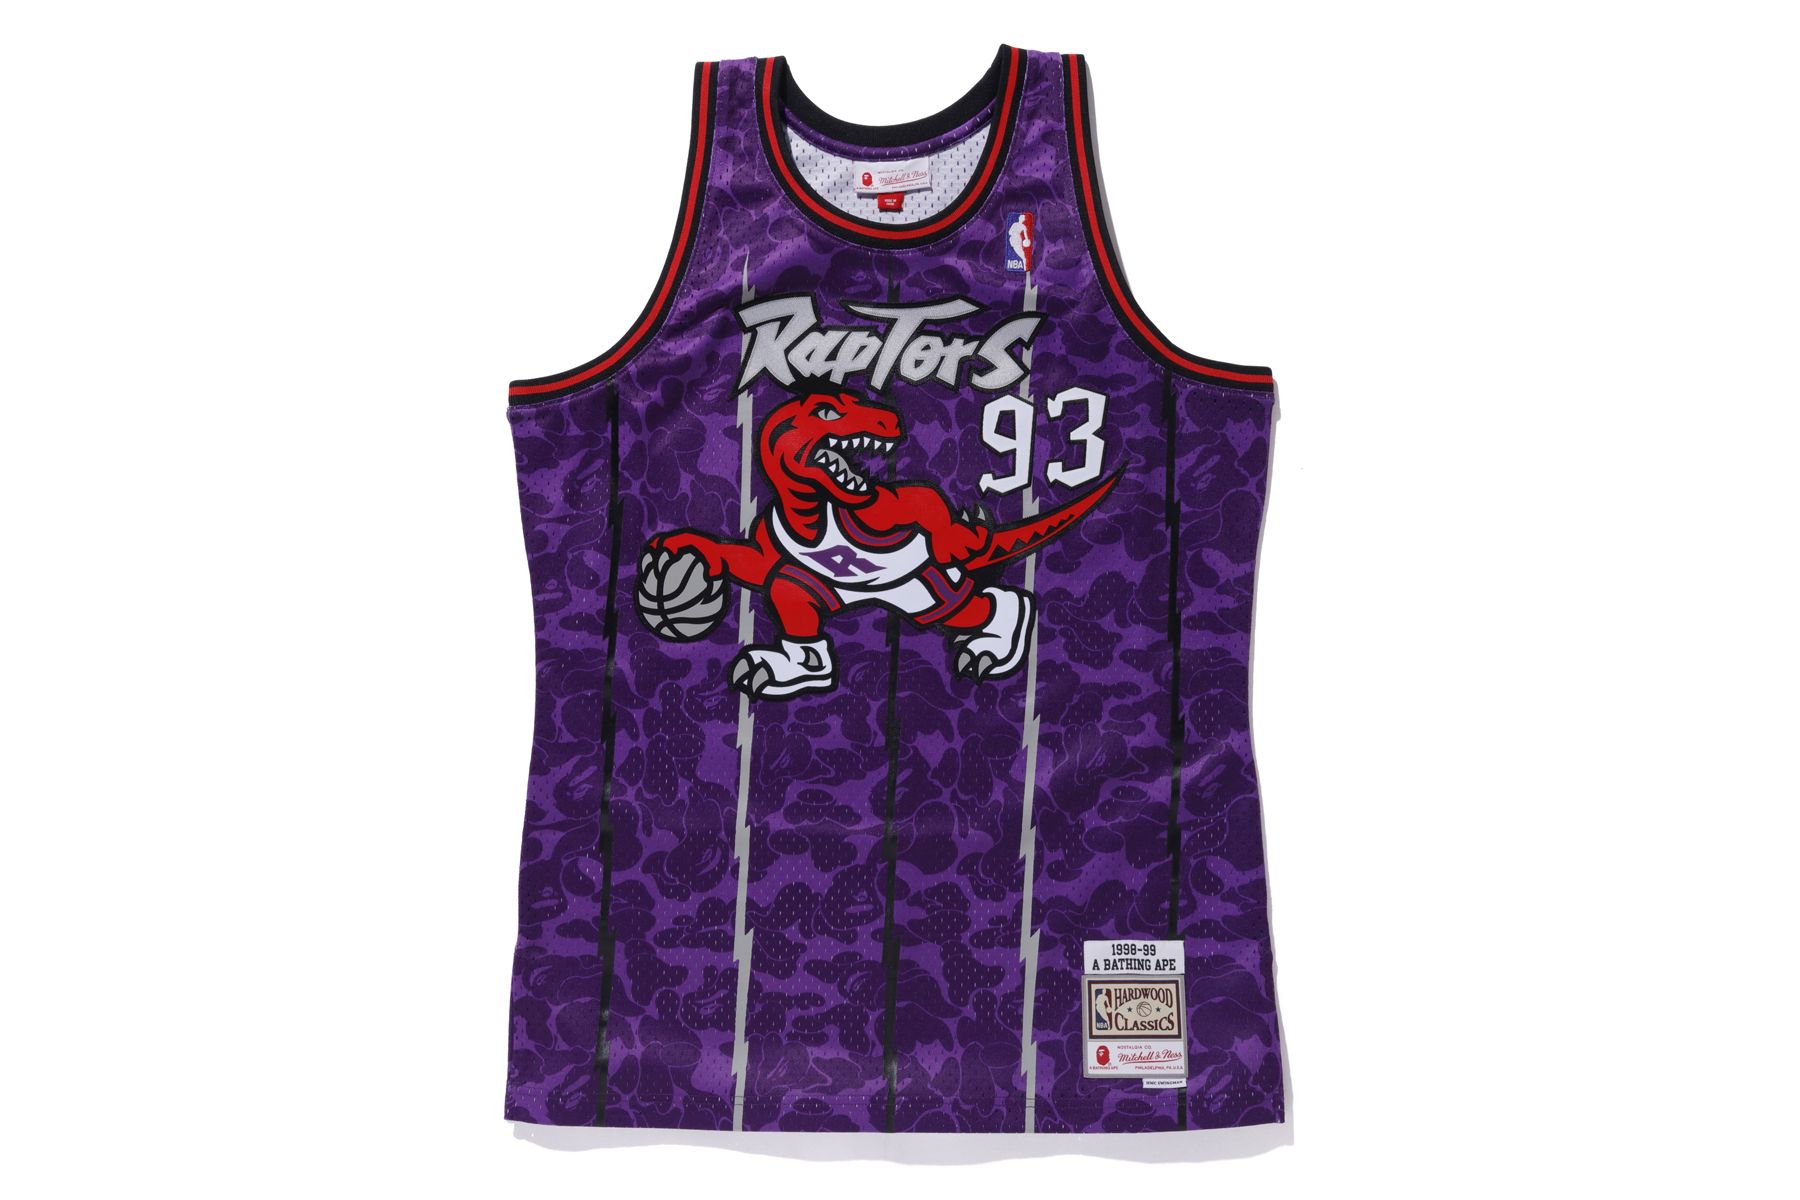 Mitchell & Ness on X: The Worm in purple and gold. The 1998-99